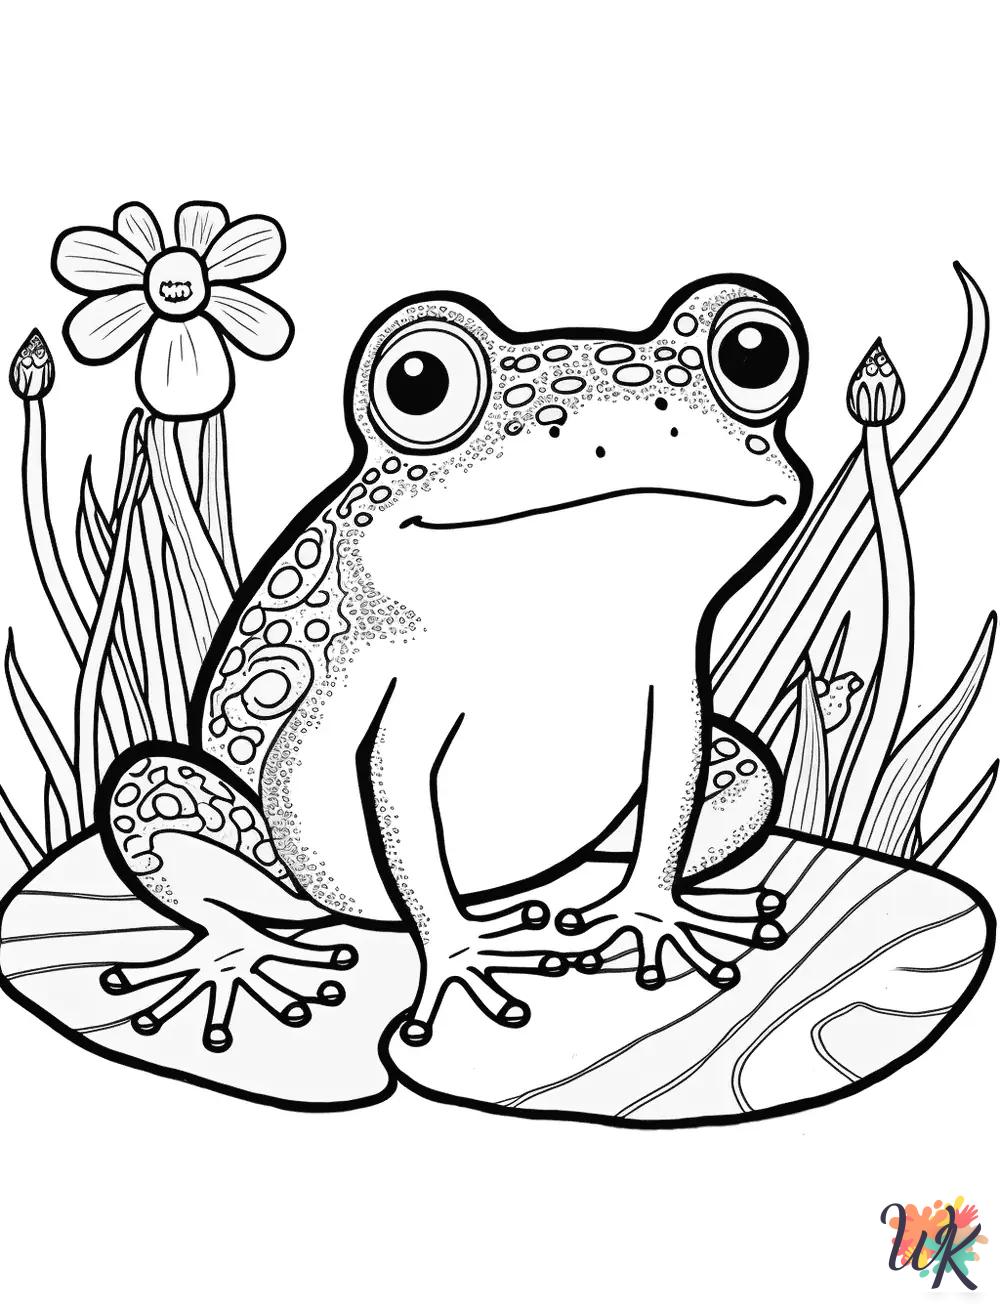 free full size printable Frog coloring pages for adults pdf